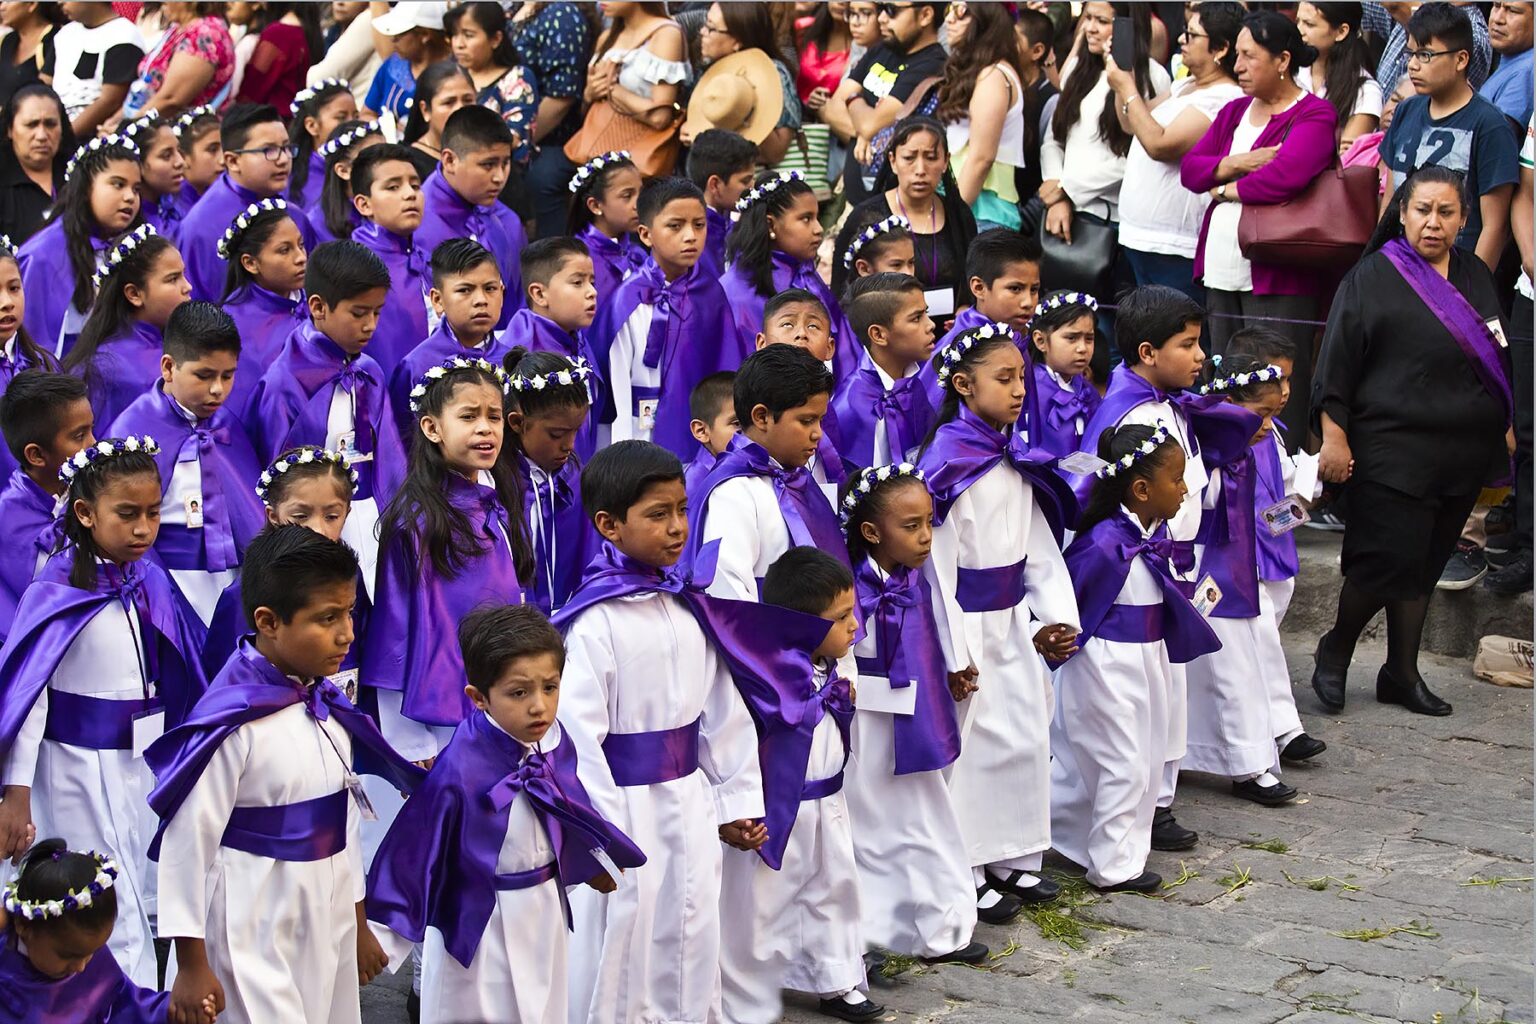 Mexican girls dresses as angels walk in the Good Friday Procession, known as the Santo Entierro, at the ORATORIO CHURCH - SAN MIGUEL DE ALLENDE, MEXICO